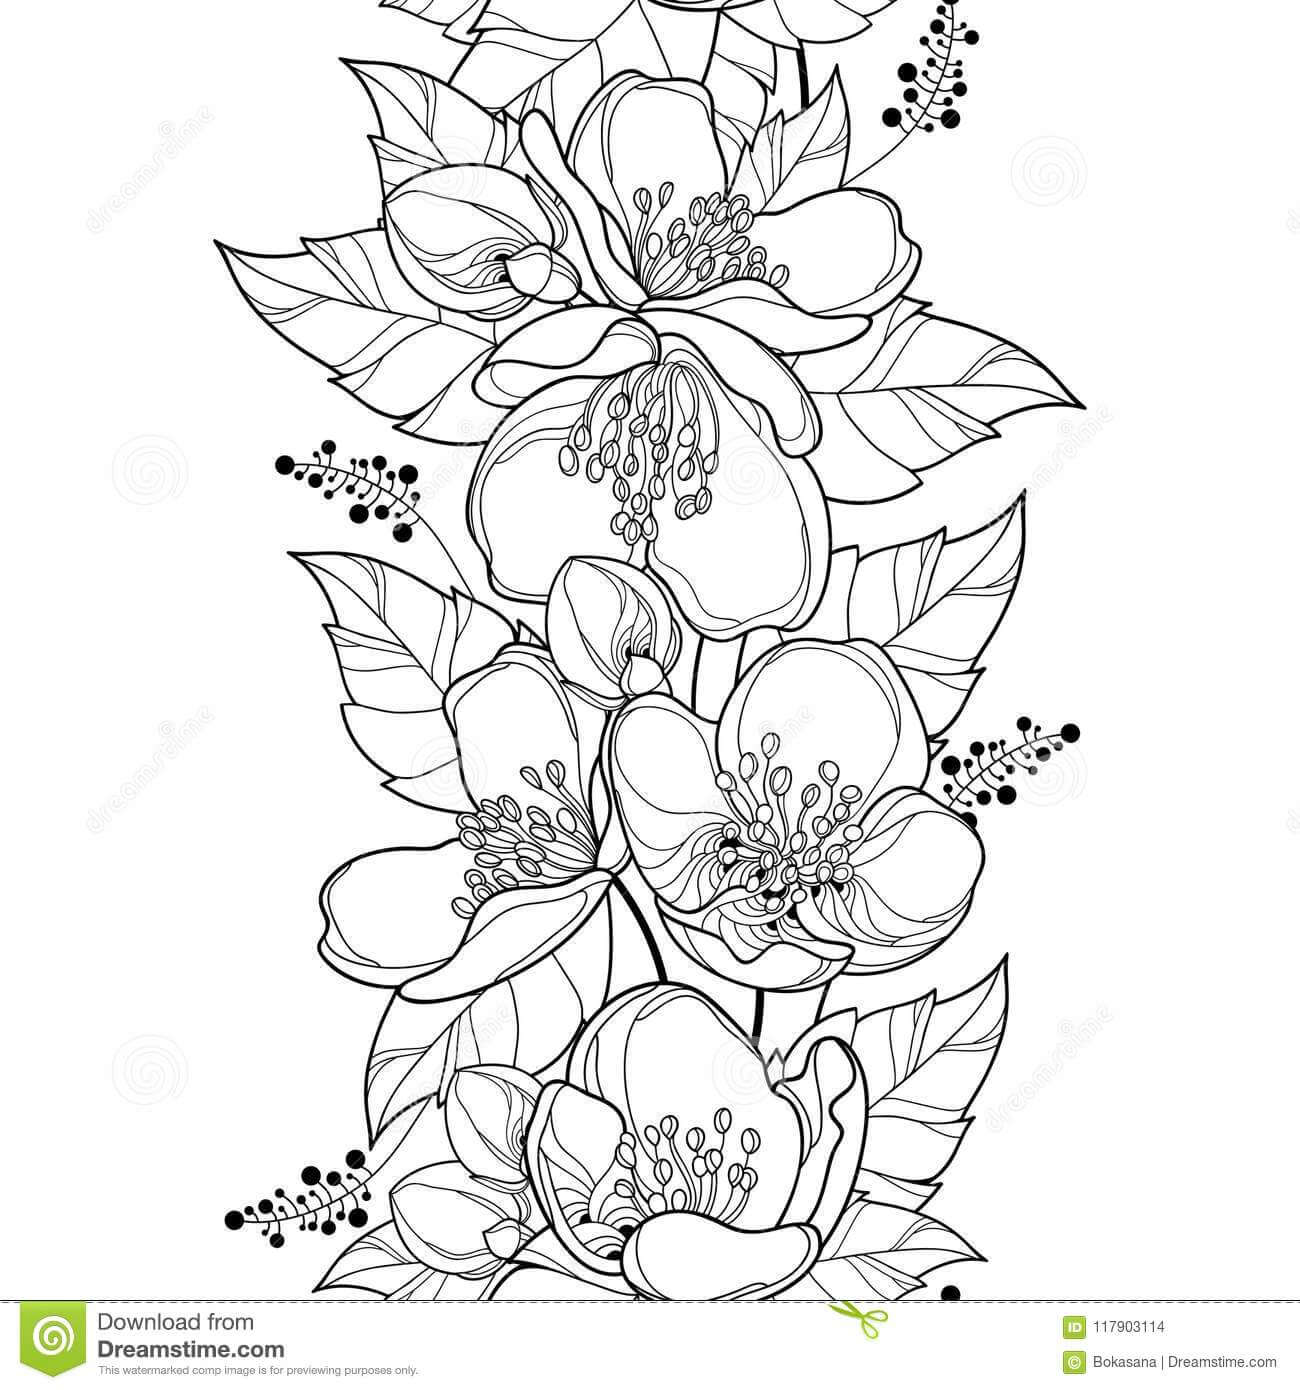 flower coloring pages for adults | beautiful flower coloring pages for kids adults | simple flower coloring pages pdf